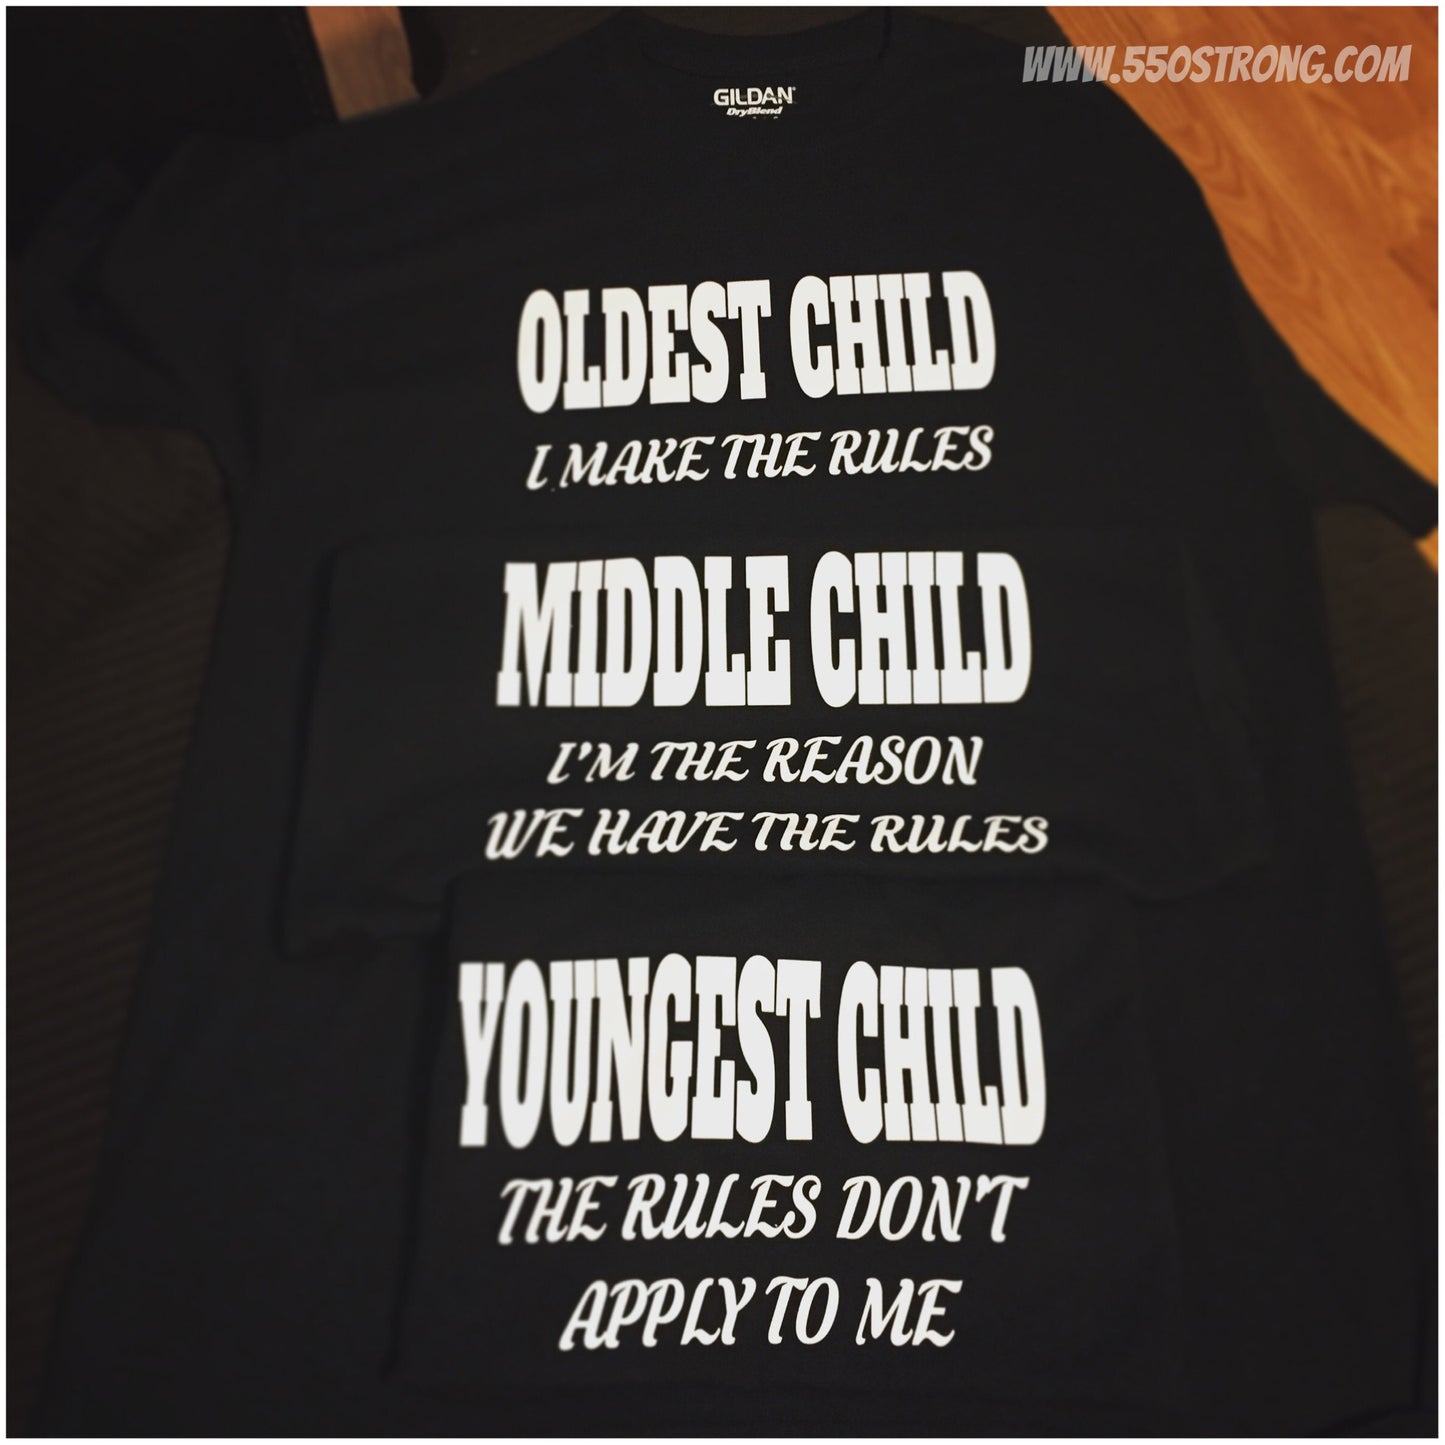 Family - Oldest, Middle, and Youngest Child T Shirt. - 550strong